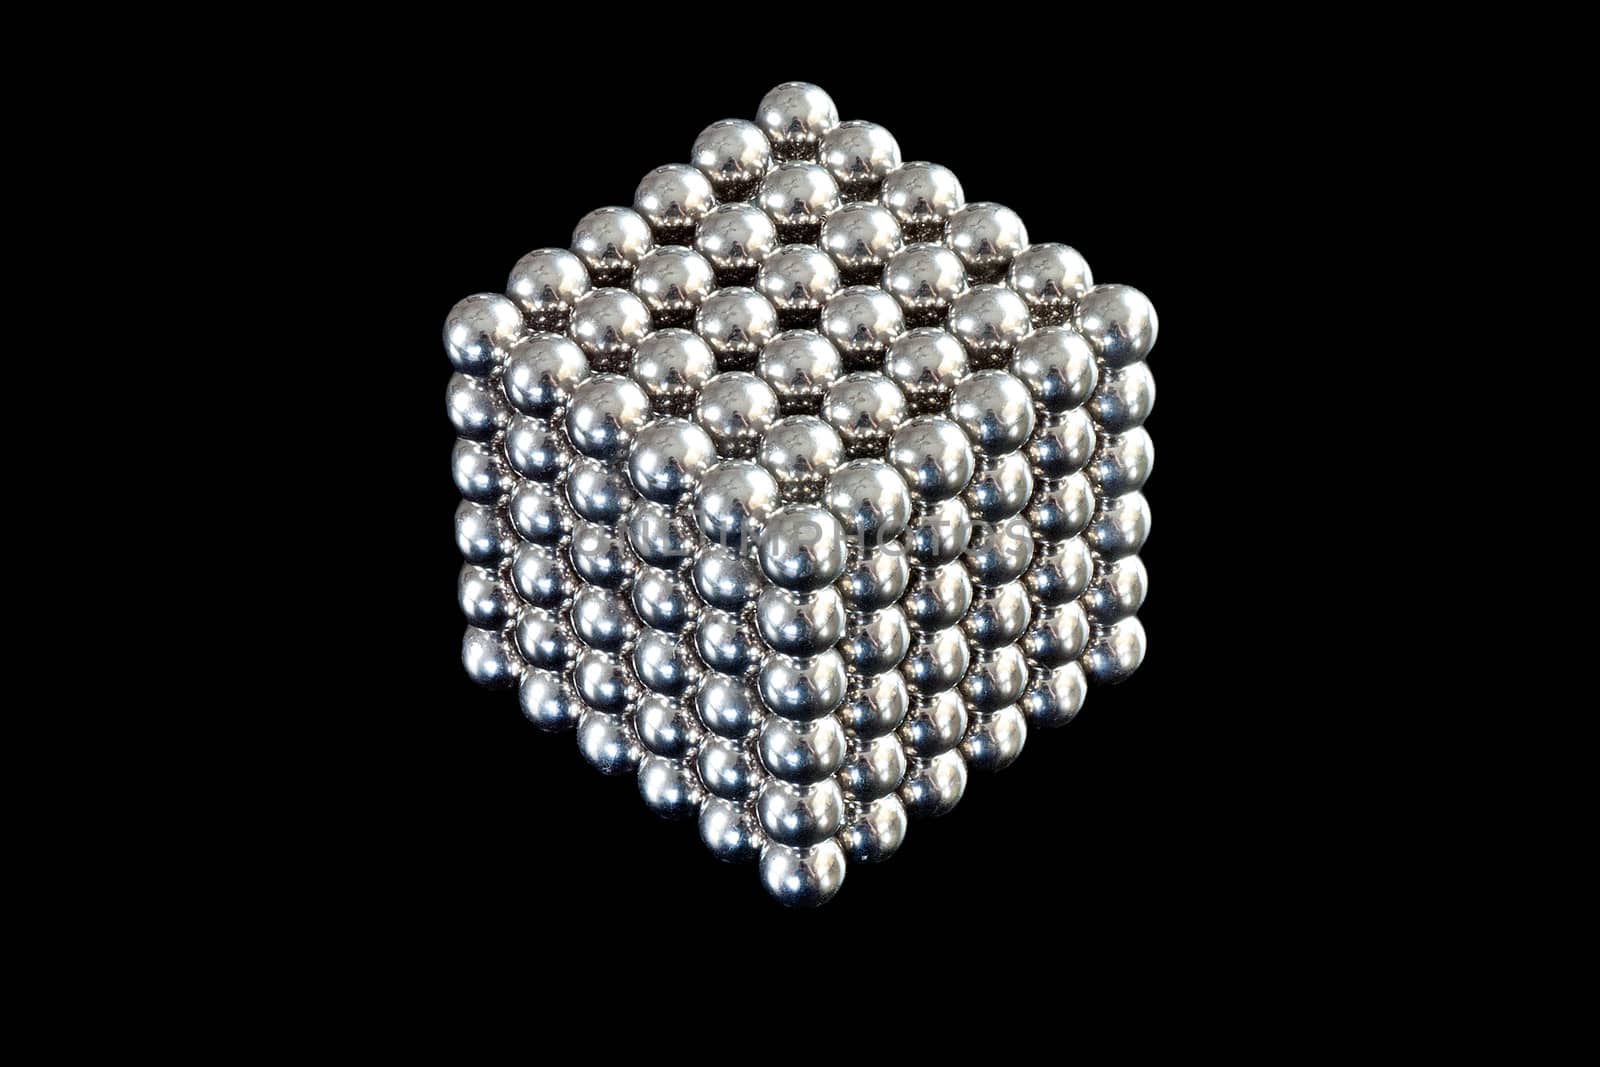 Close-up of a cube composed of magnetic balls.